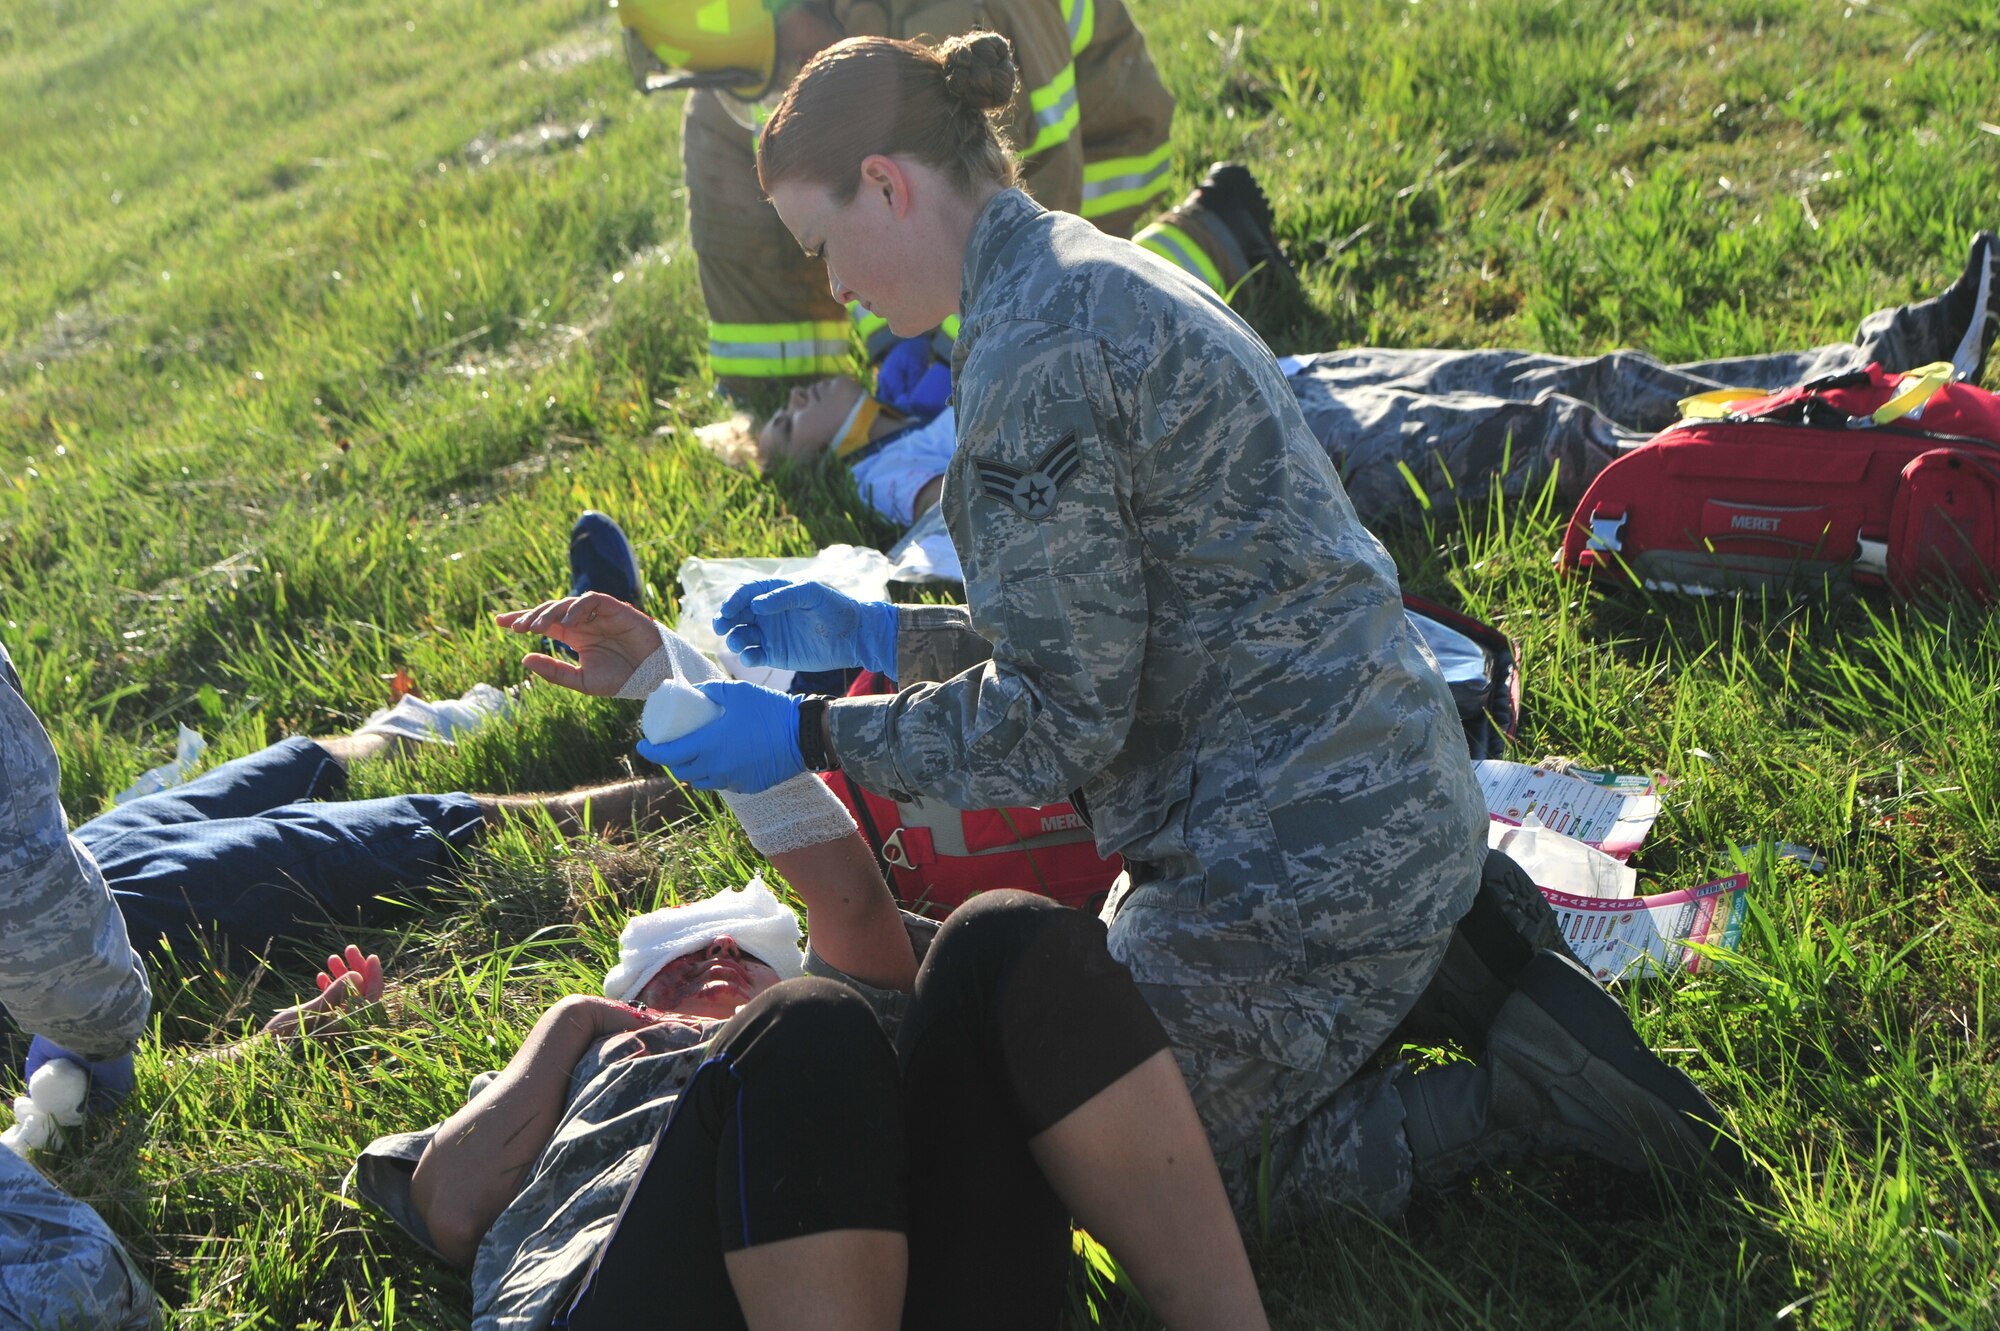 U.S. Air Force Senior Airman Katelyn Potts, an aerospacial medical technician assigned to the 509th Medical Operations Squadron, applies medical aid to a simulated aircraft accident victim during a major accident response exercise (MARE) at Whiteman Air Force Base, Mo., June 8, 2016. Firefighters and other emergency response personnel conducted the MARE to prepare for any mishaps that may occur in real-world situations.  (US Air Force photo by Senior Airman Jovan Banks)